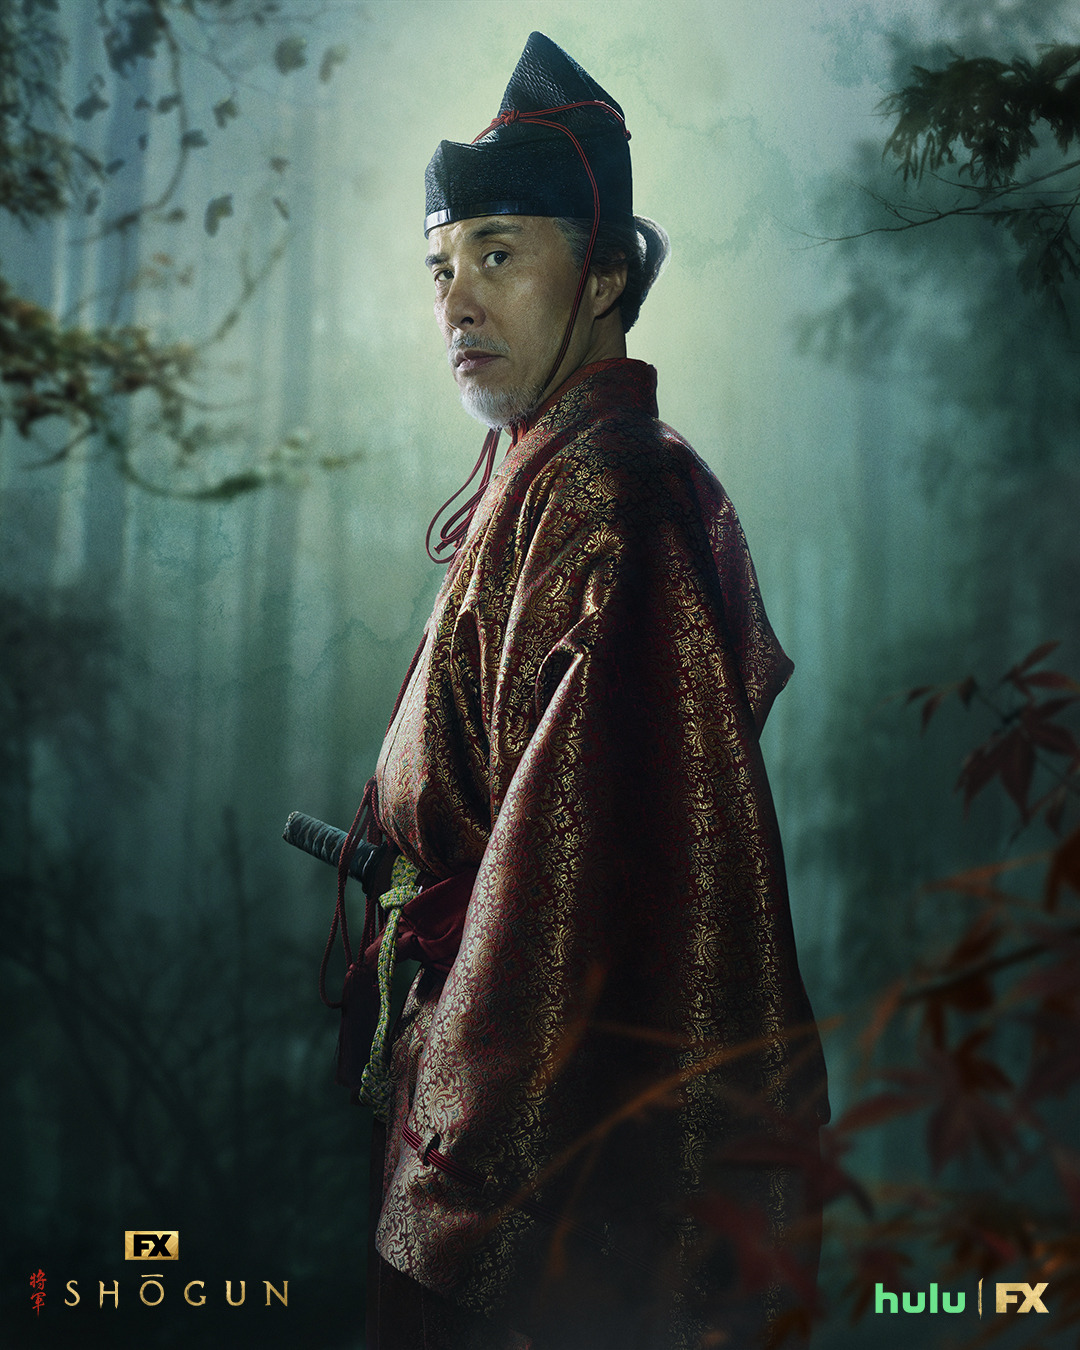 Extra Large TV Poster Image for Shogun (#8 of 24)